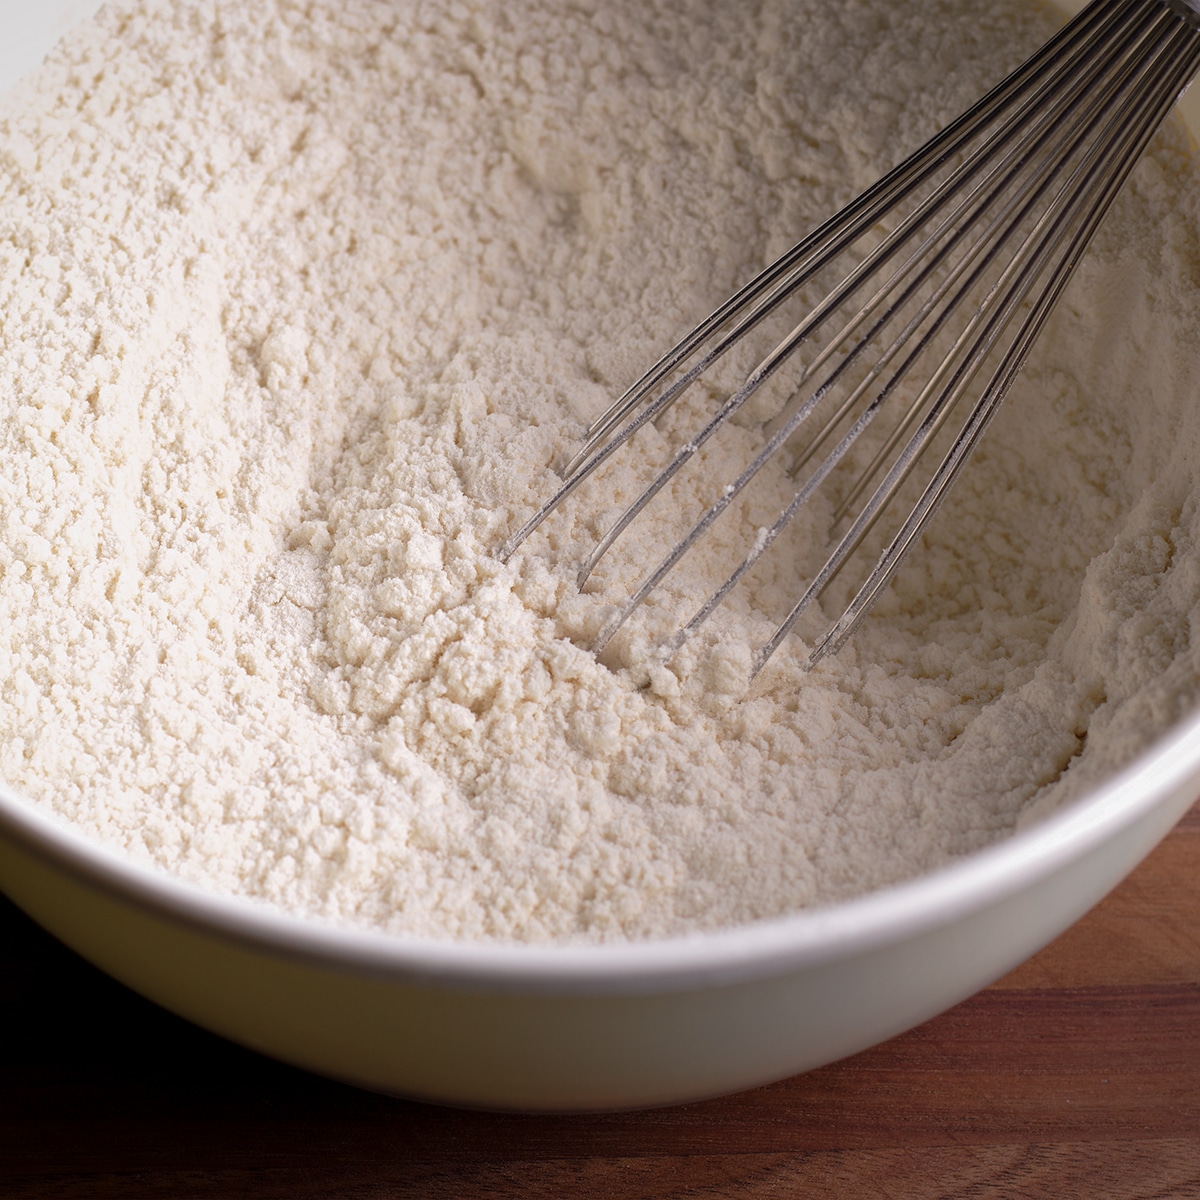 Stirring the dry ingredients for New York Cheesecake crust with a wire whisk.